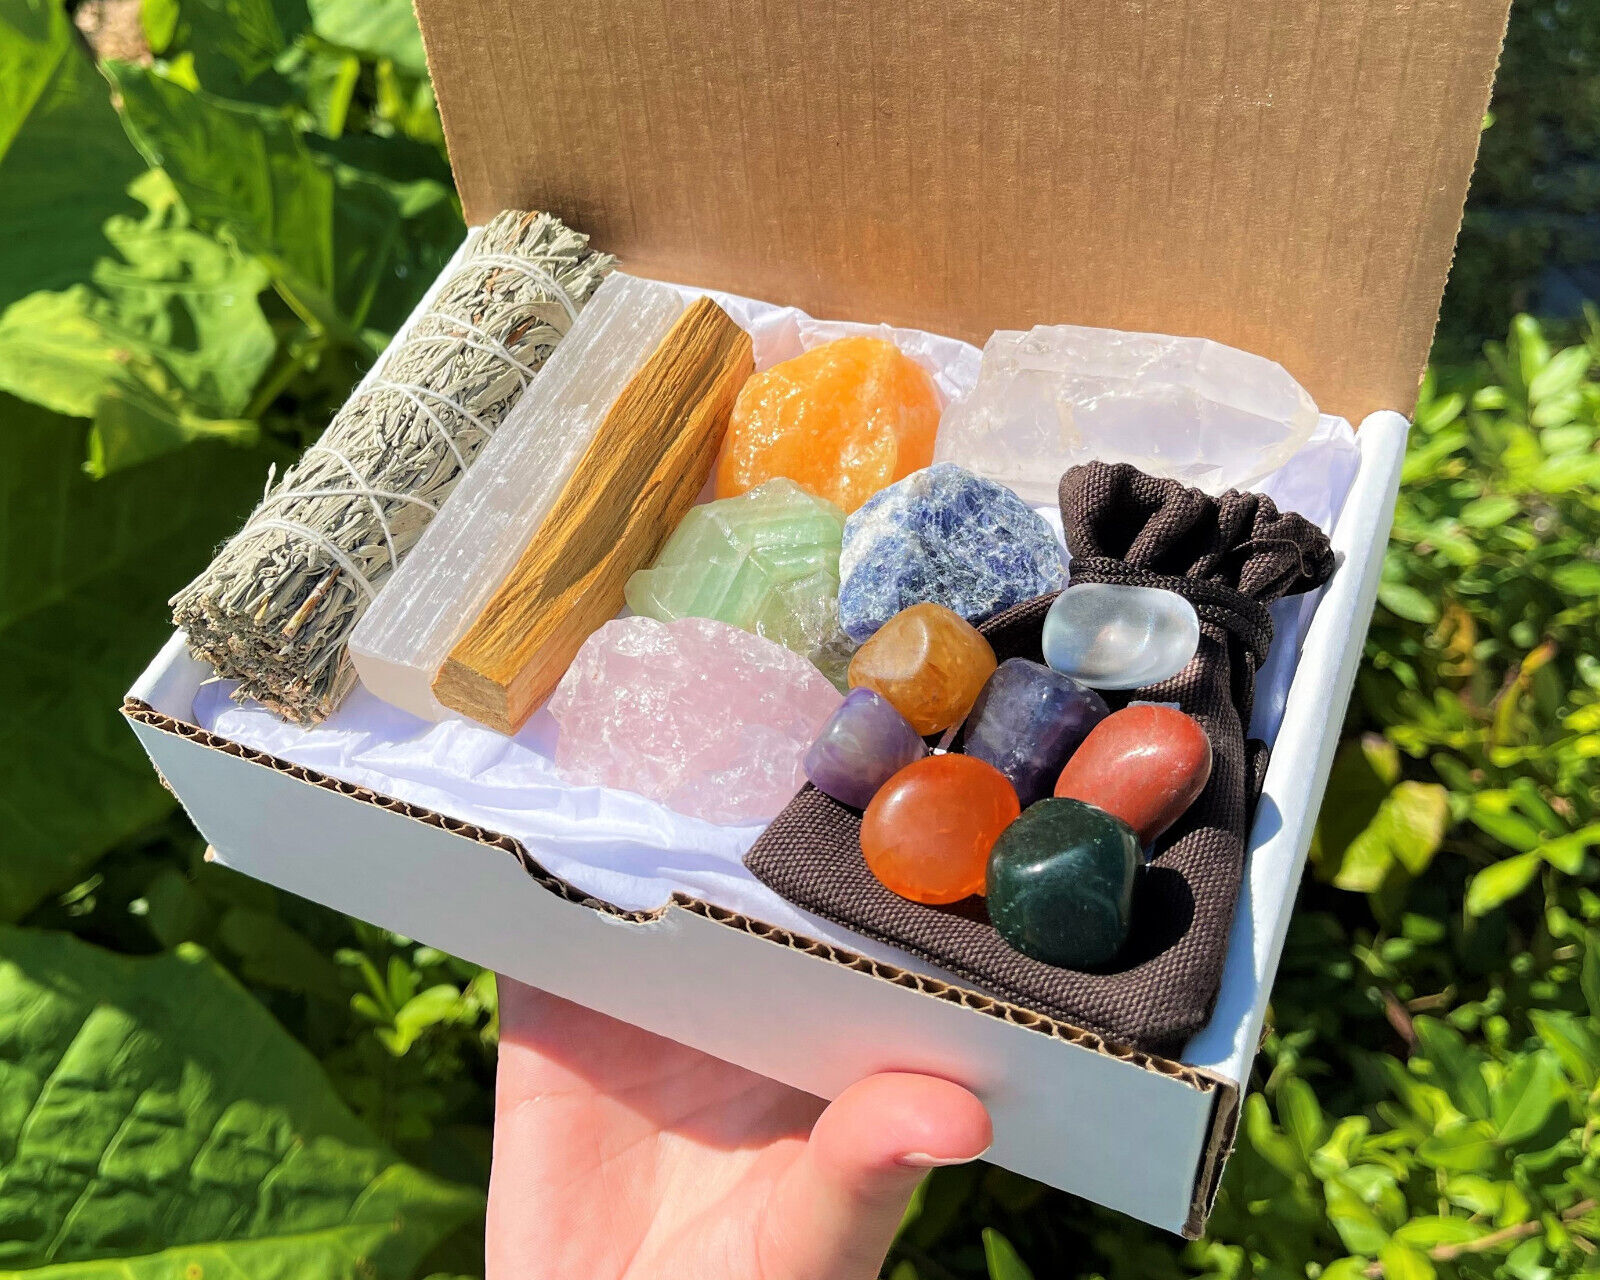 Crystal Healing & Cleansing Kit, 15 pcs Box: Stones, Smudge, Palo & Directions